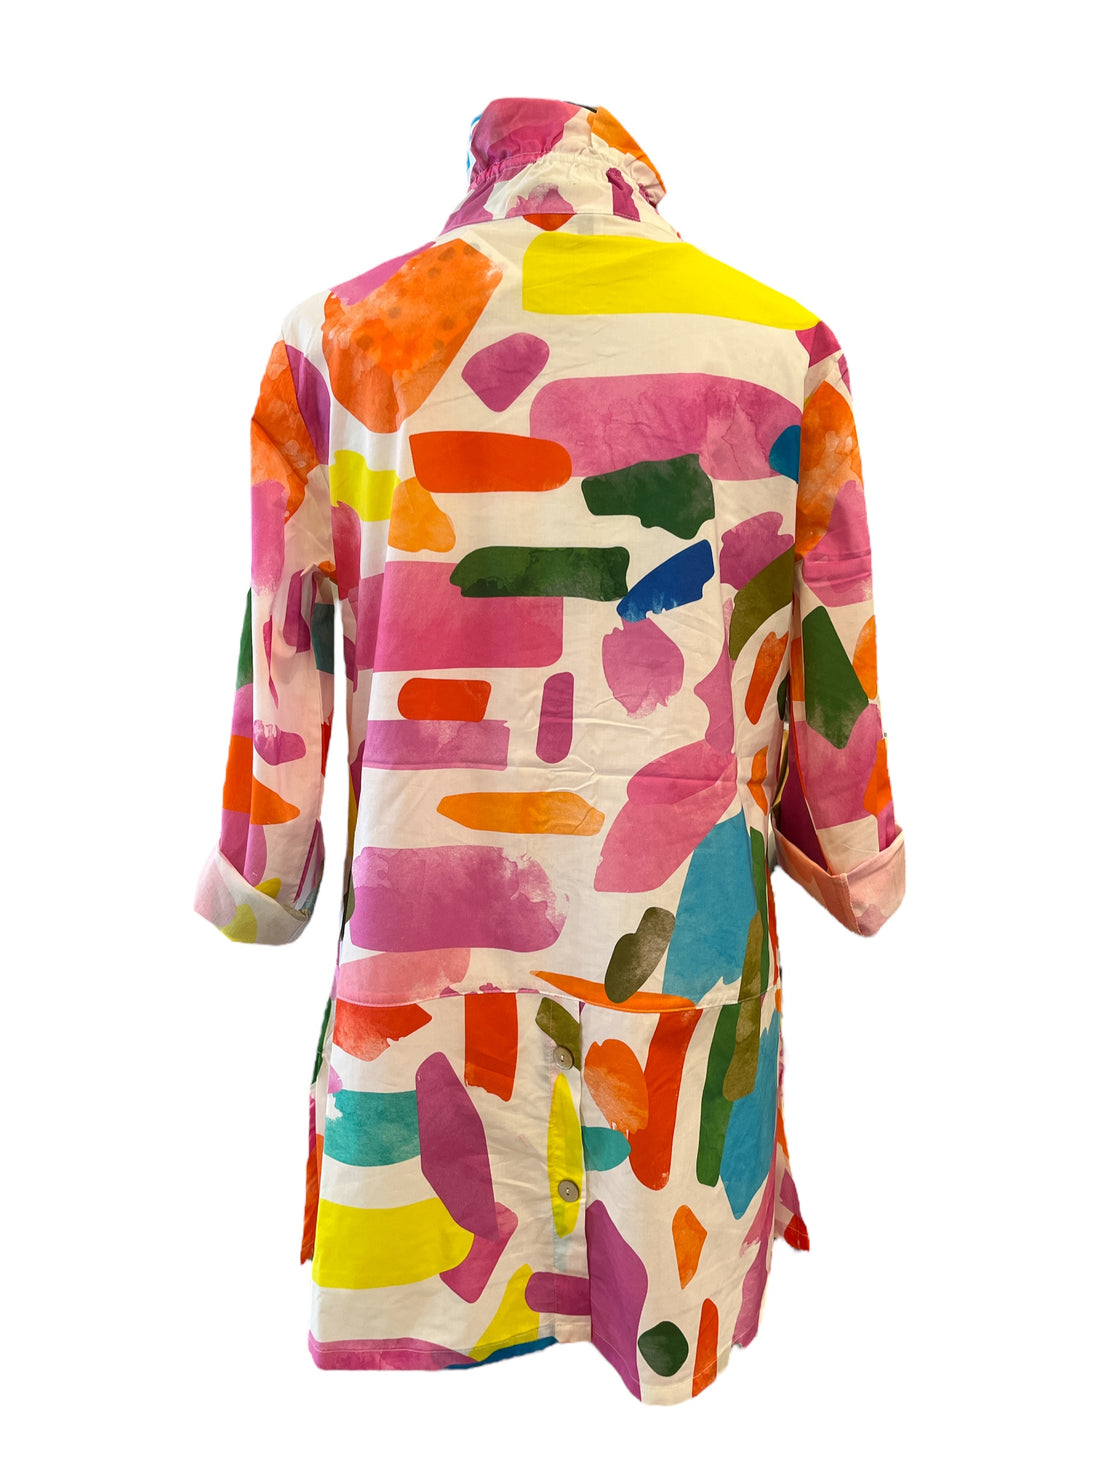 Too Fan | Vibrant Abstract Top